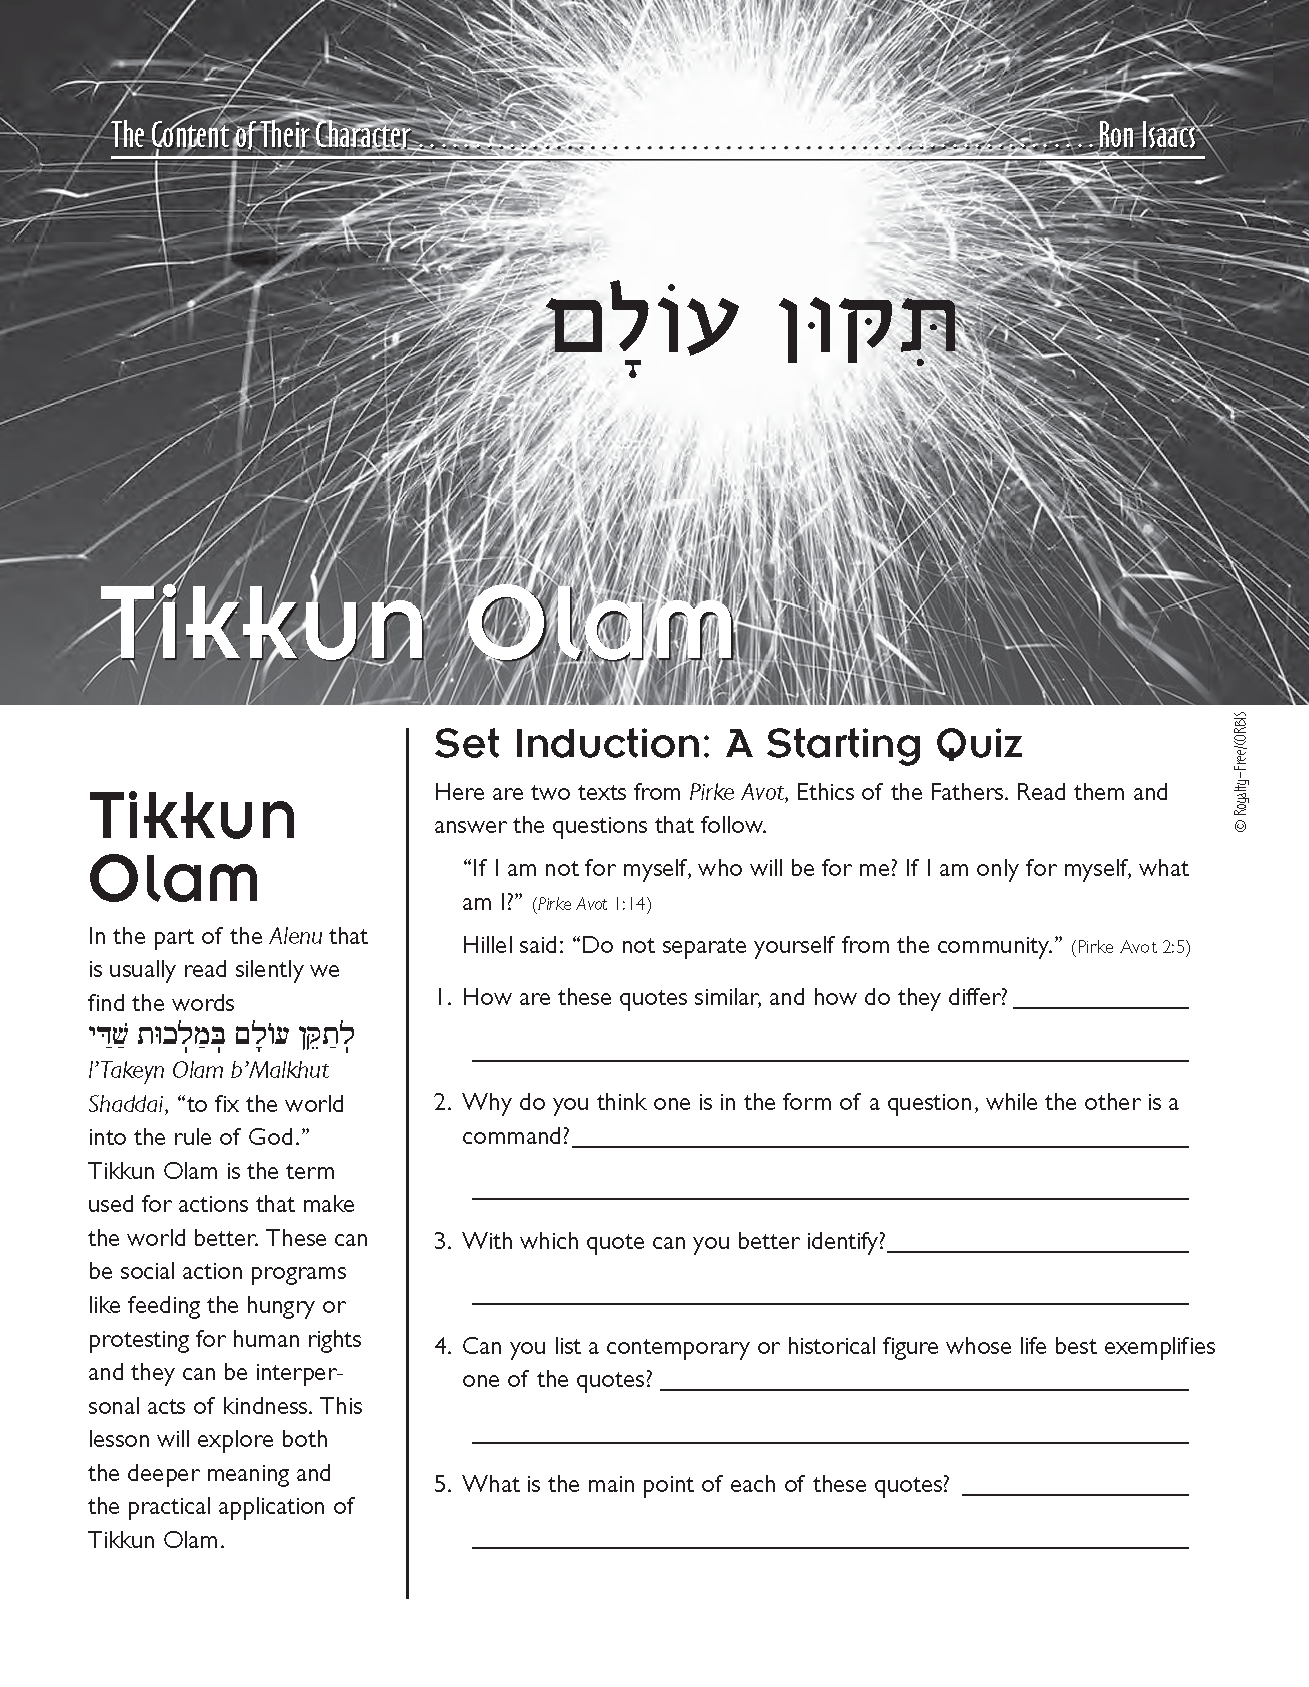 Content of Their Character: Tikun Olam (Repairing the World)